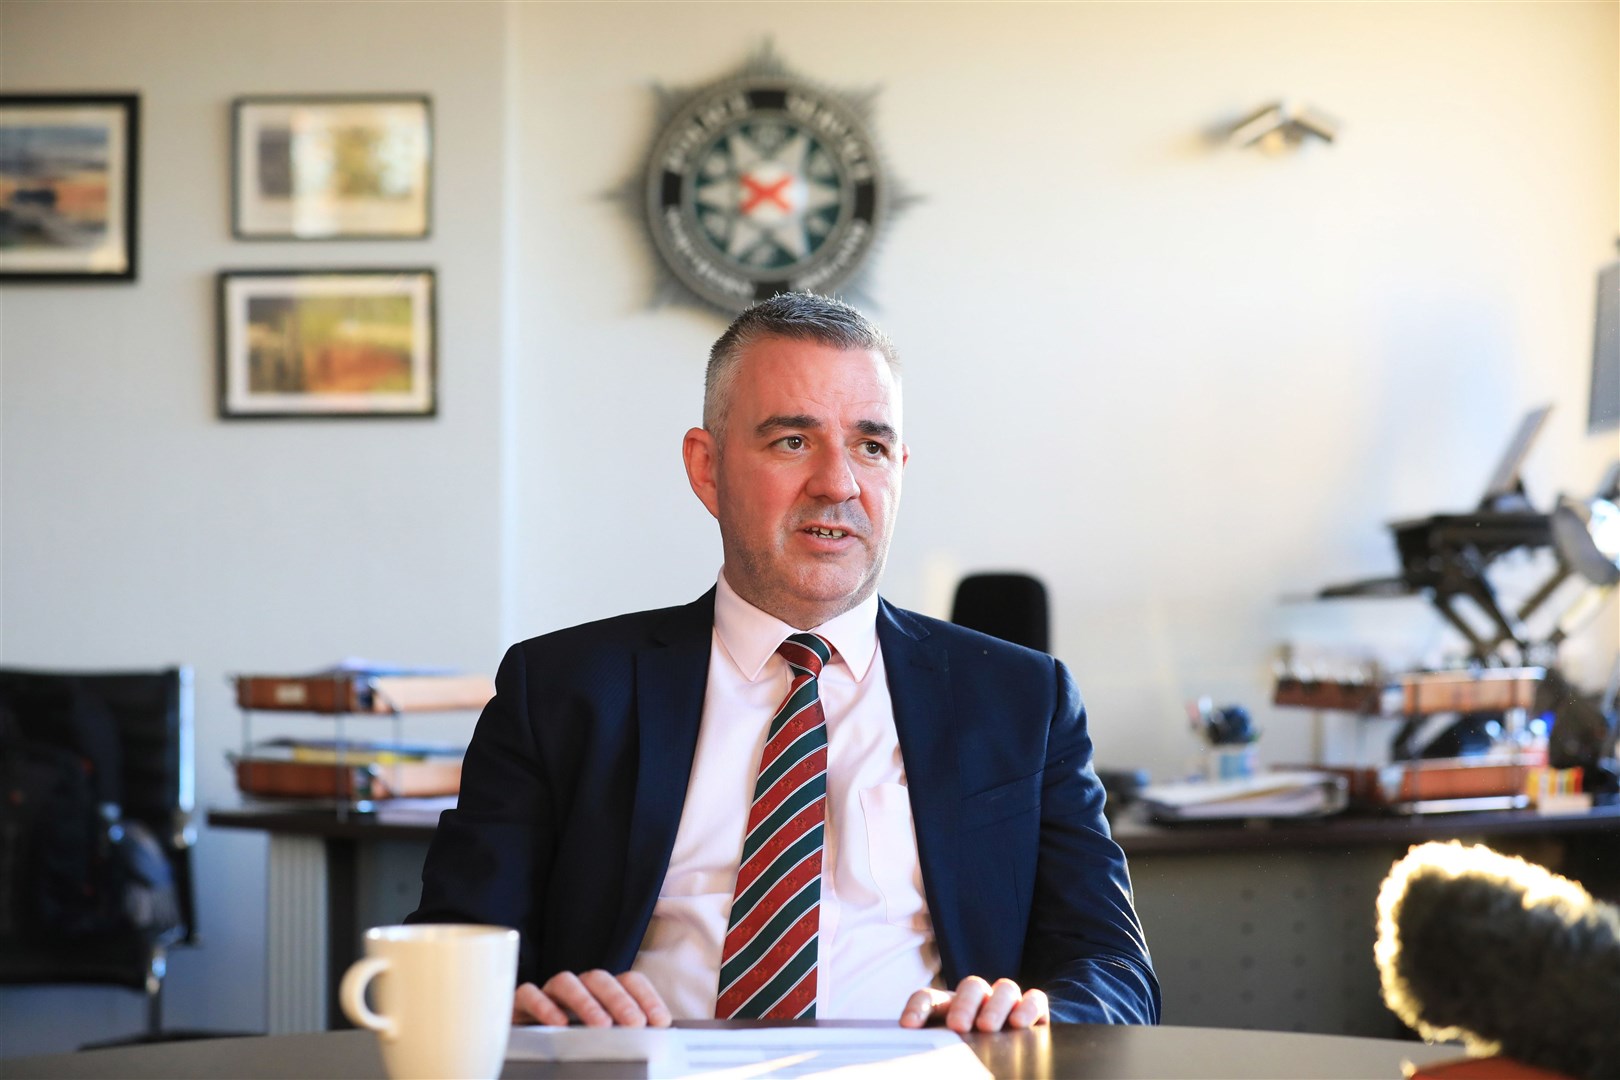 Police Federation for Northern Ireland chairman Liam Kelly said he has been ‘inundated’ with messages from ‘shocked’ and ‘angry’ officers (Peter Morrison/PA)